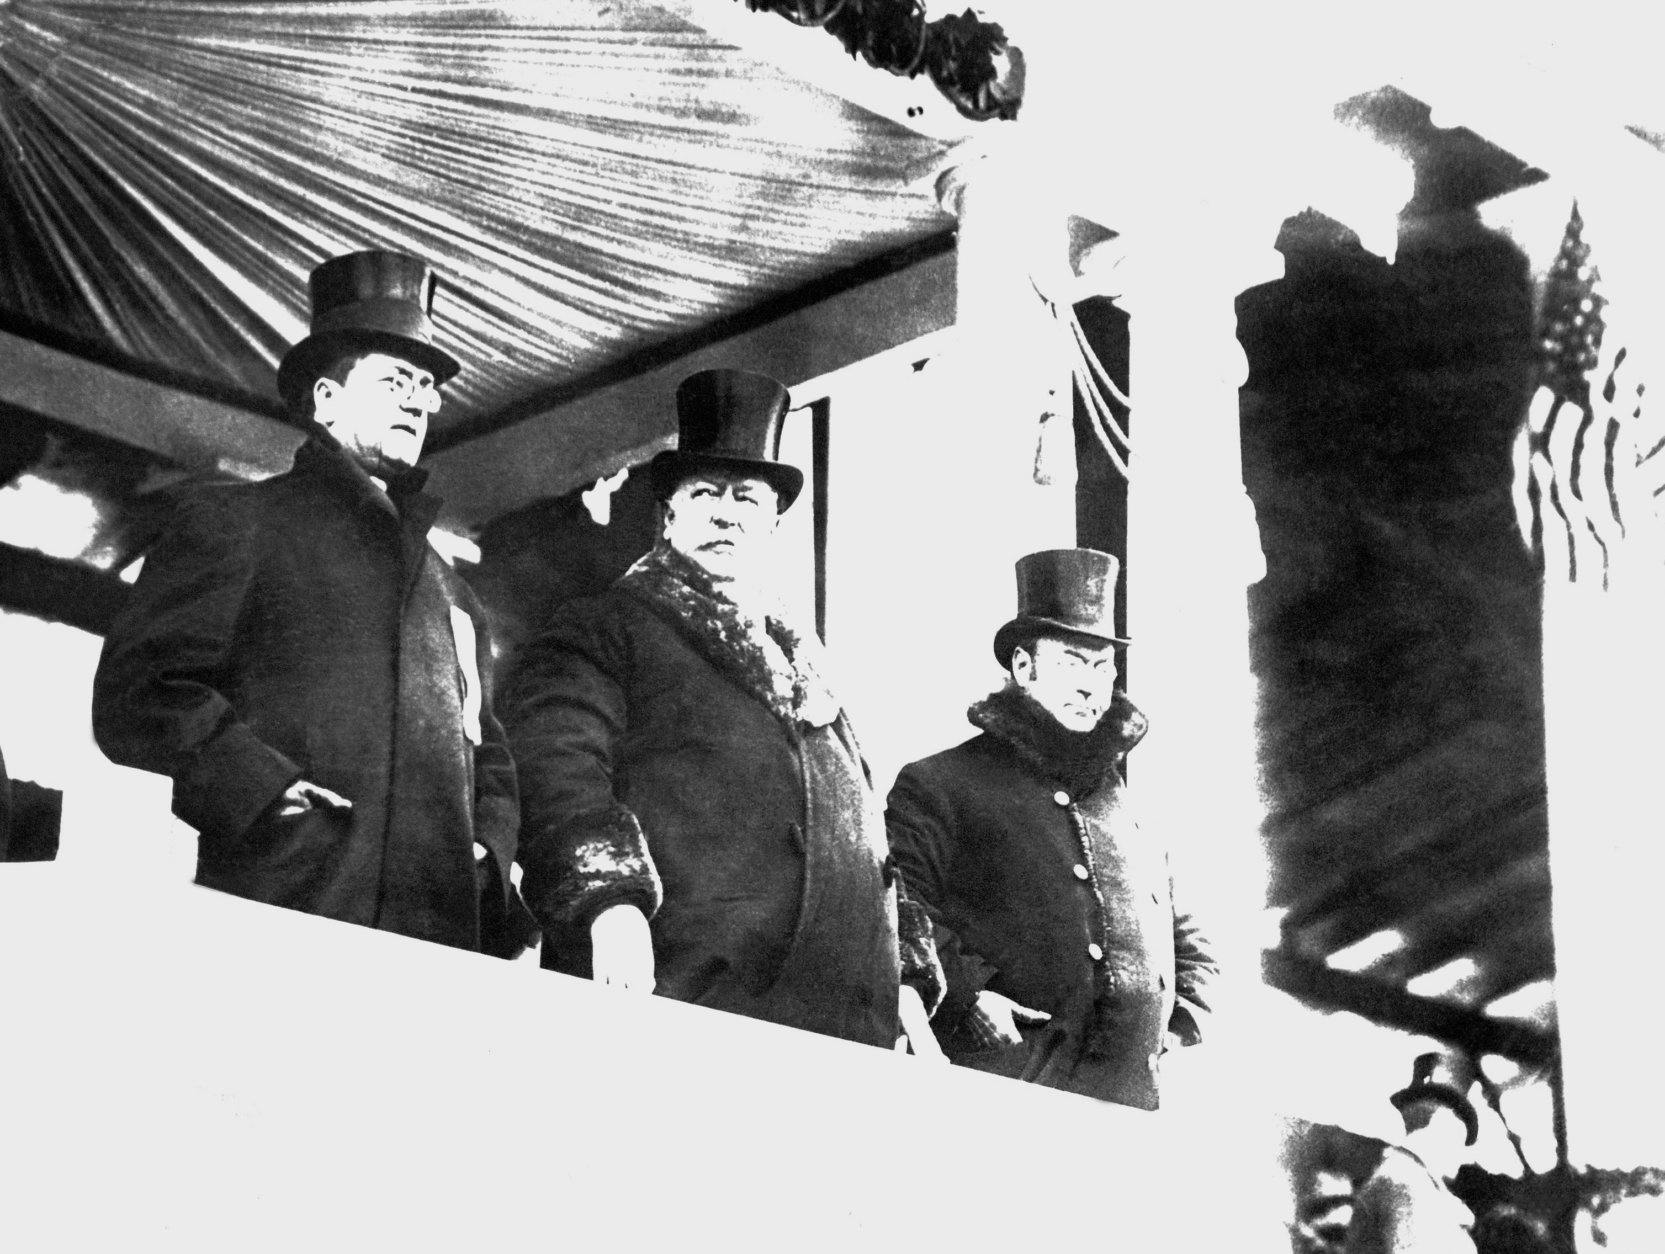 William Howard Taft, center, wore big fur-lined overcoat when he reviewed parade after his inauguration as president, on March 4, 1909 in Washington.  At right is James S. Sherman, vice president of the United States, and at left Edward Hallwagon, chief of the Inaugural Committee.    A whirling blizzard, featured by flashes of lighting, as well as rain, snow and a cutting wind, made it one of the roughest of all inauguration days. (AP Photo)